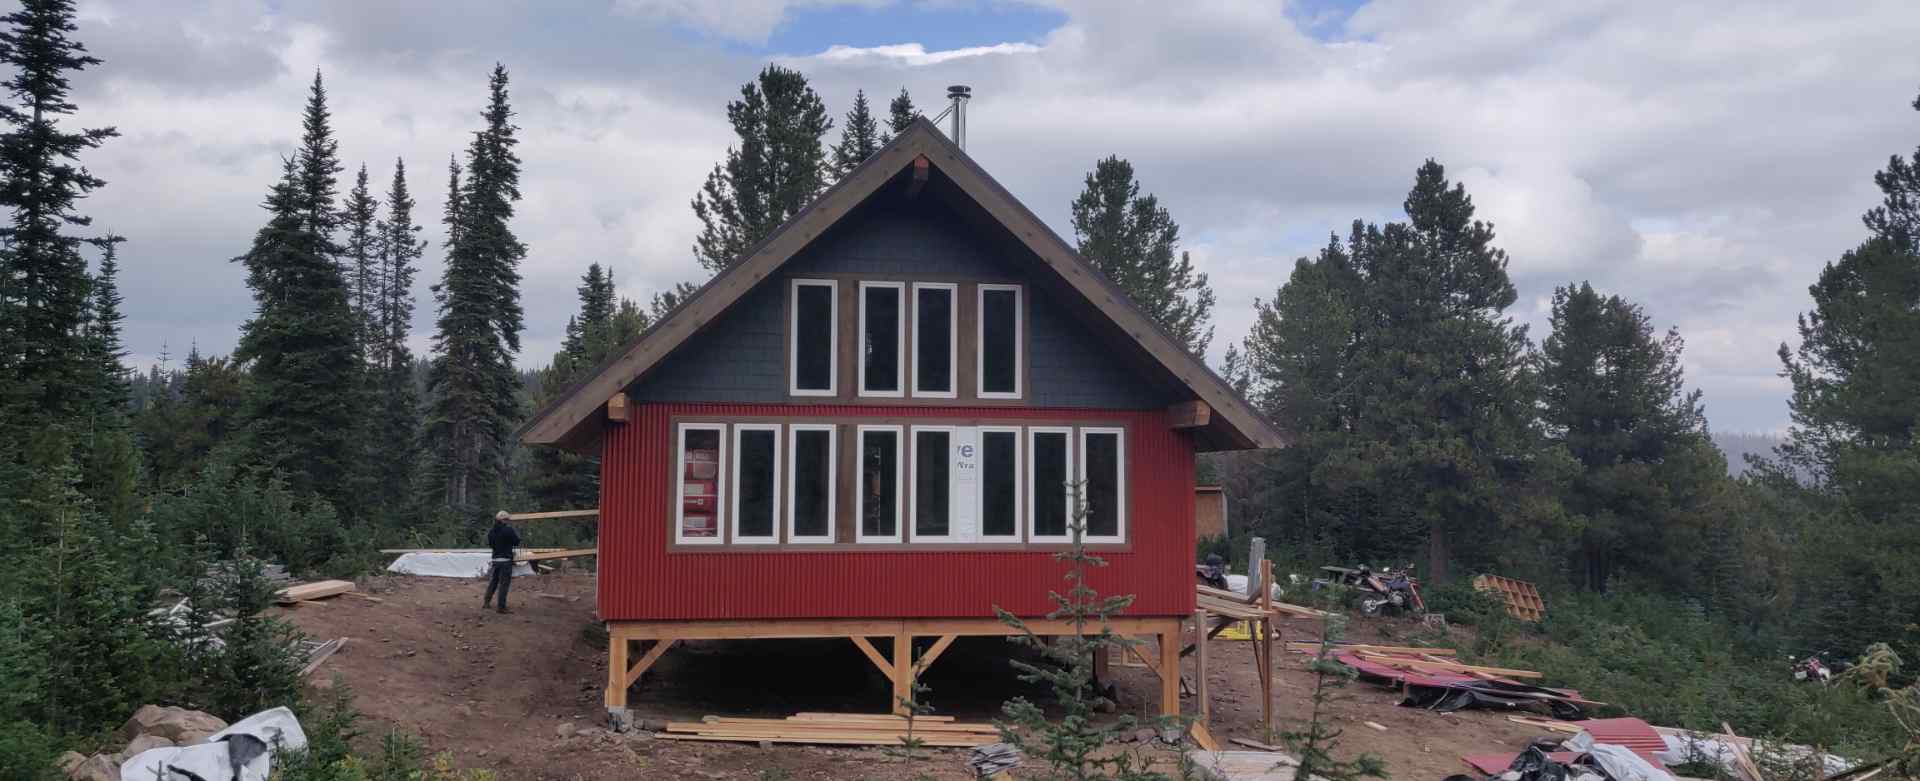 New warming cabin being built for Tweedsmuir Ski Club's skiers and snowboarders